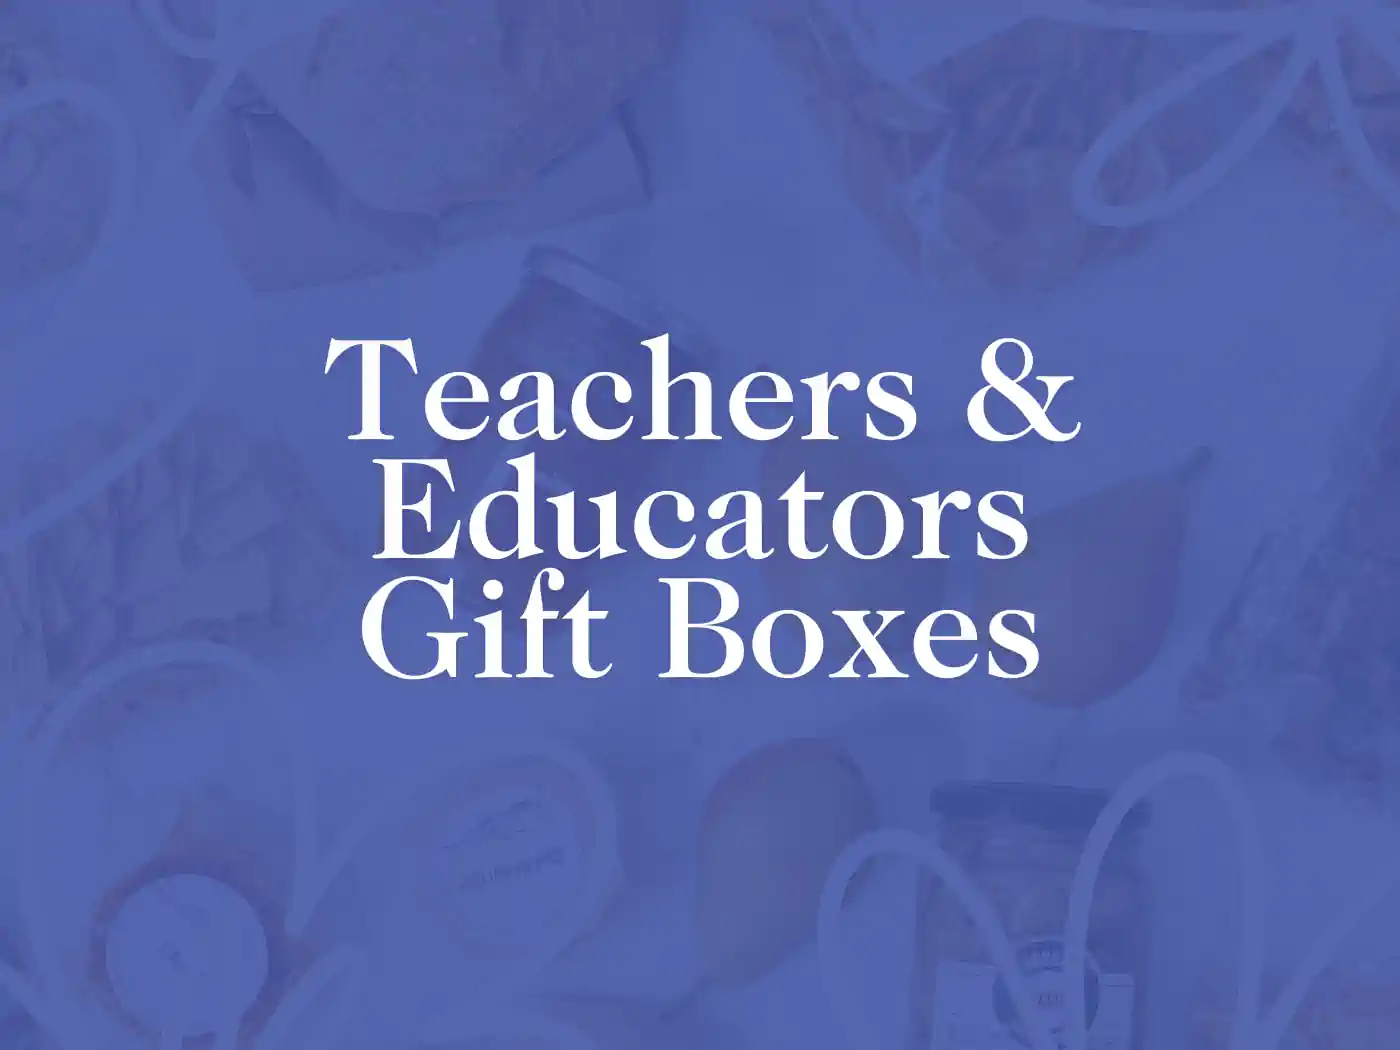 Promotional image for Teachers & Educators Gift Boxes, featuring a blue background with subtle details of classroom supplies and the text 'Teachers & Educators Gift Boxes' prominently displayed. Delivered with Heart. Fabulous Flowers and Gifts.